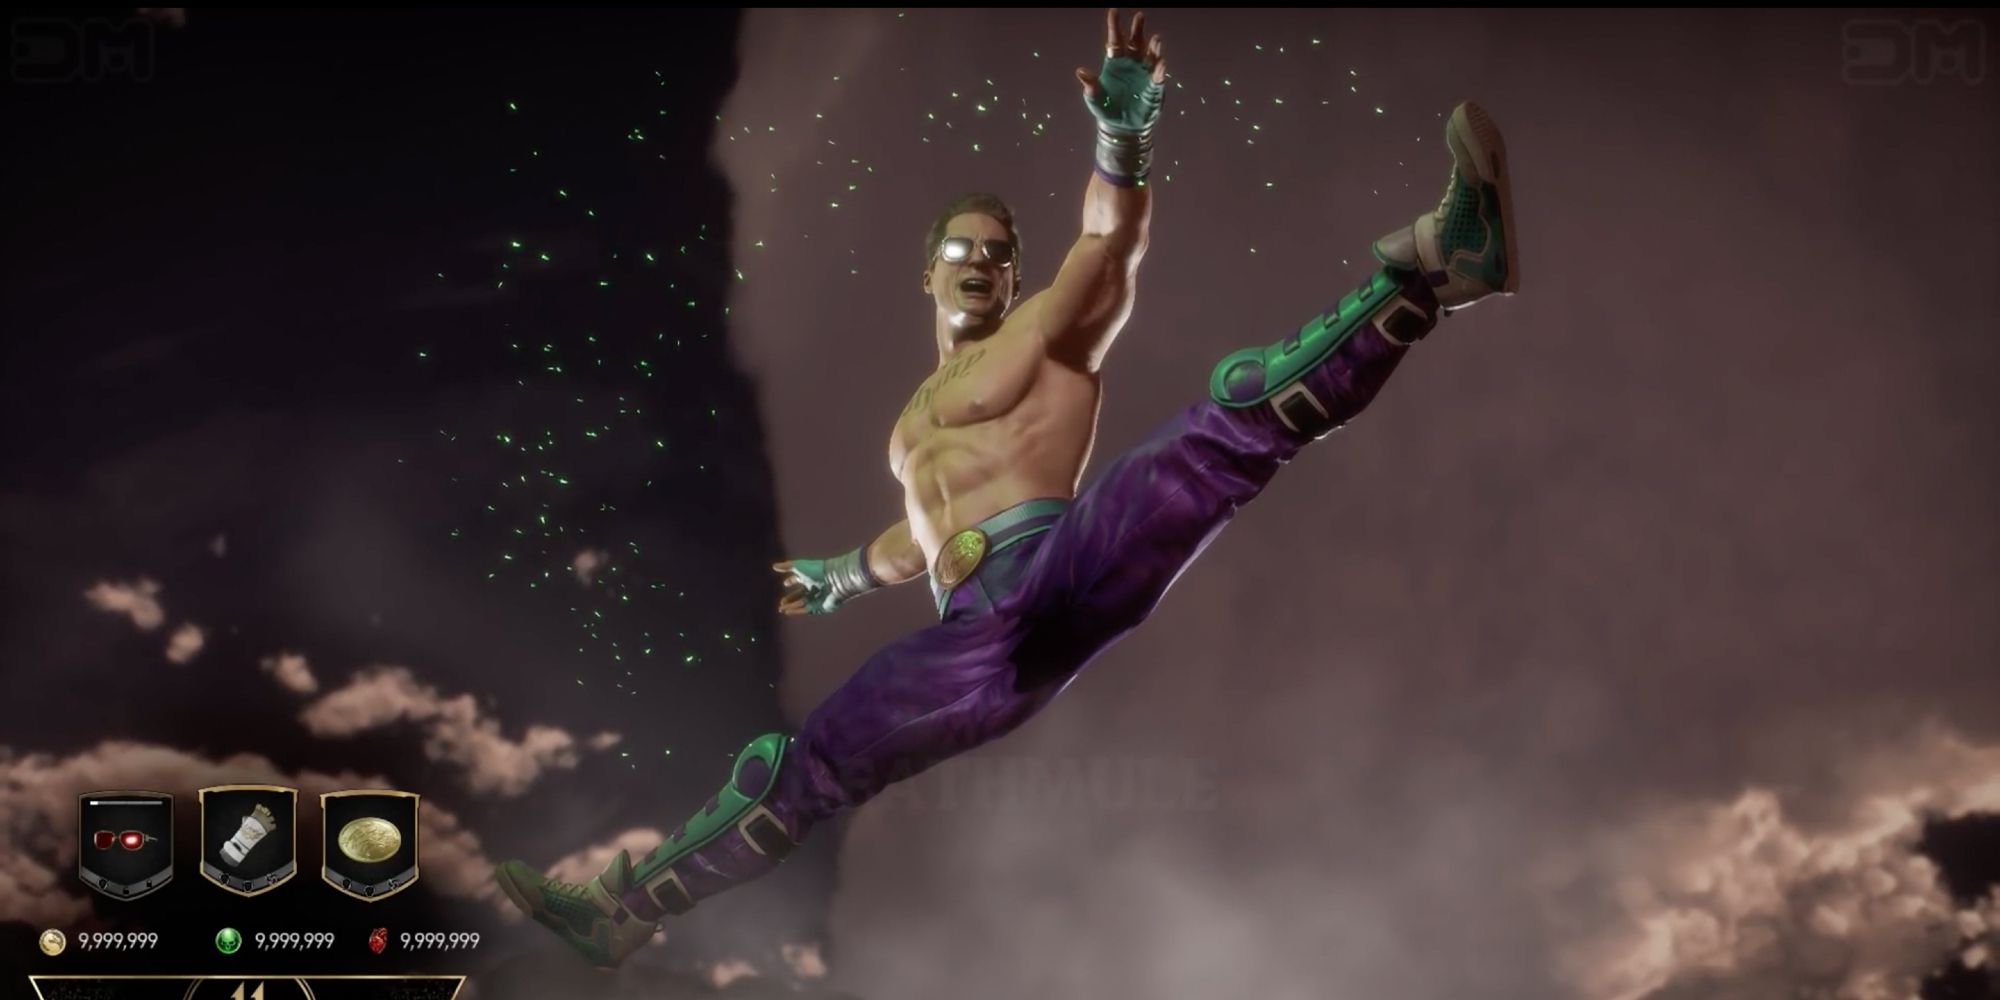 Iconic Fighting Stances in Video Games - Johnny Cage - Player celebrates victory in style